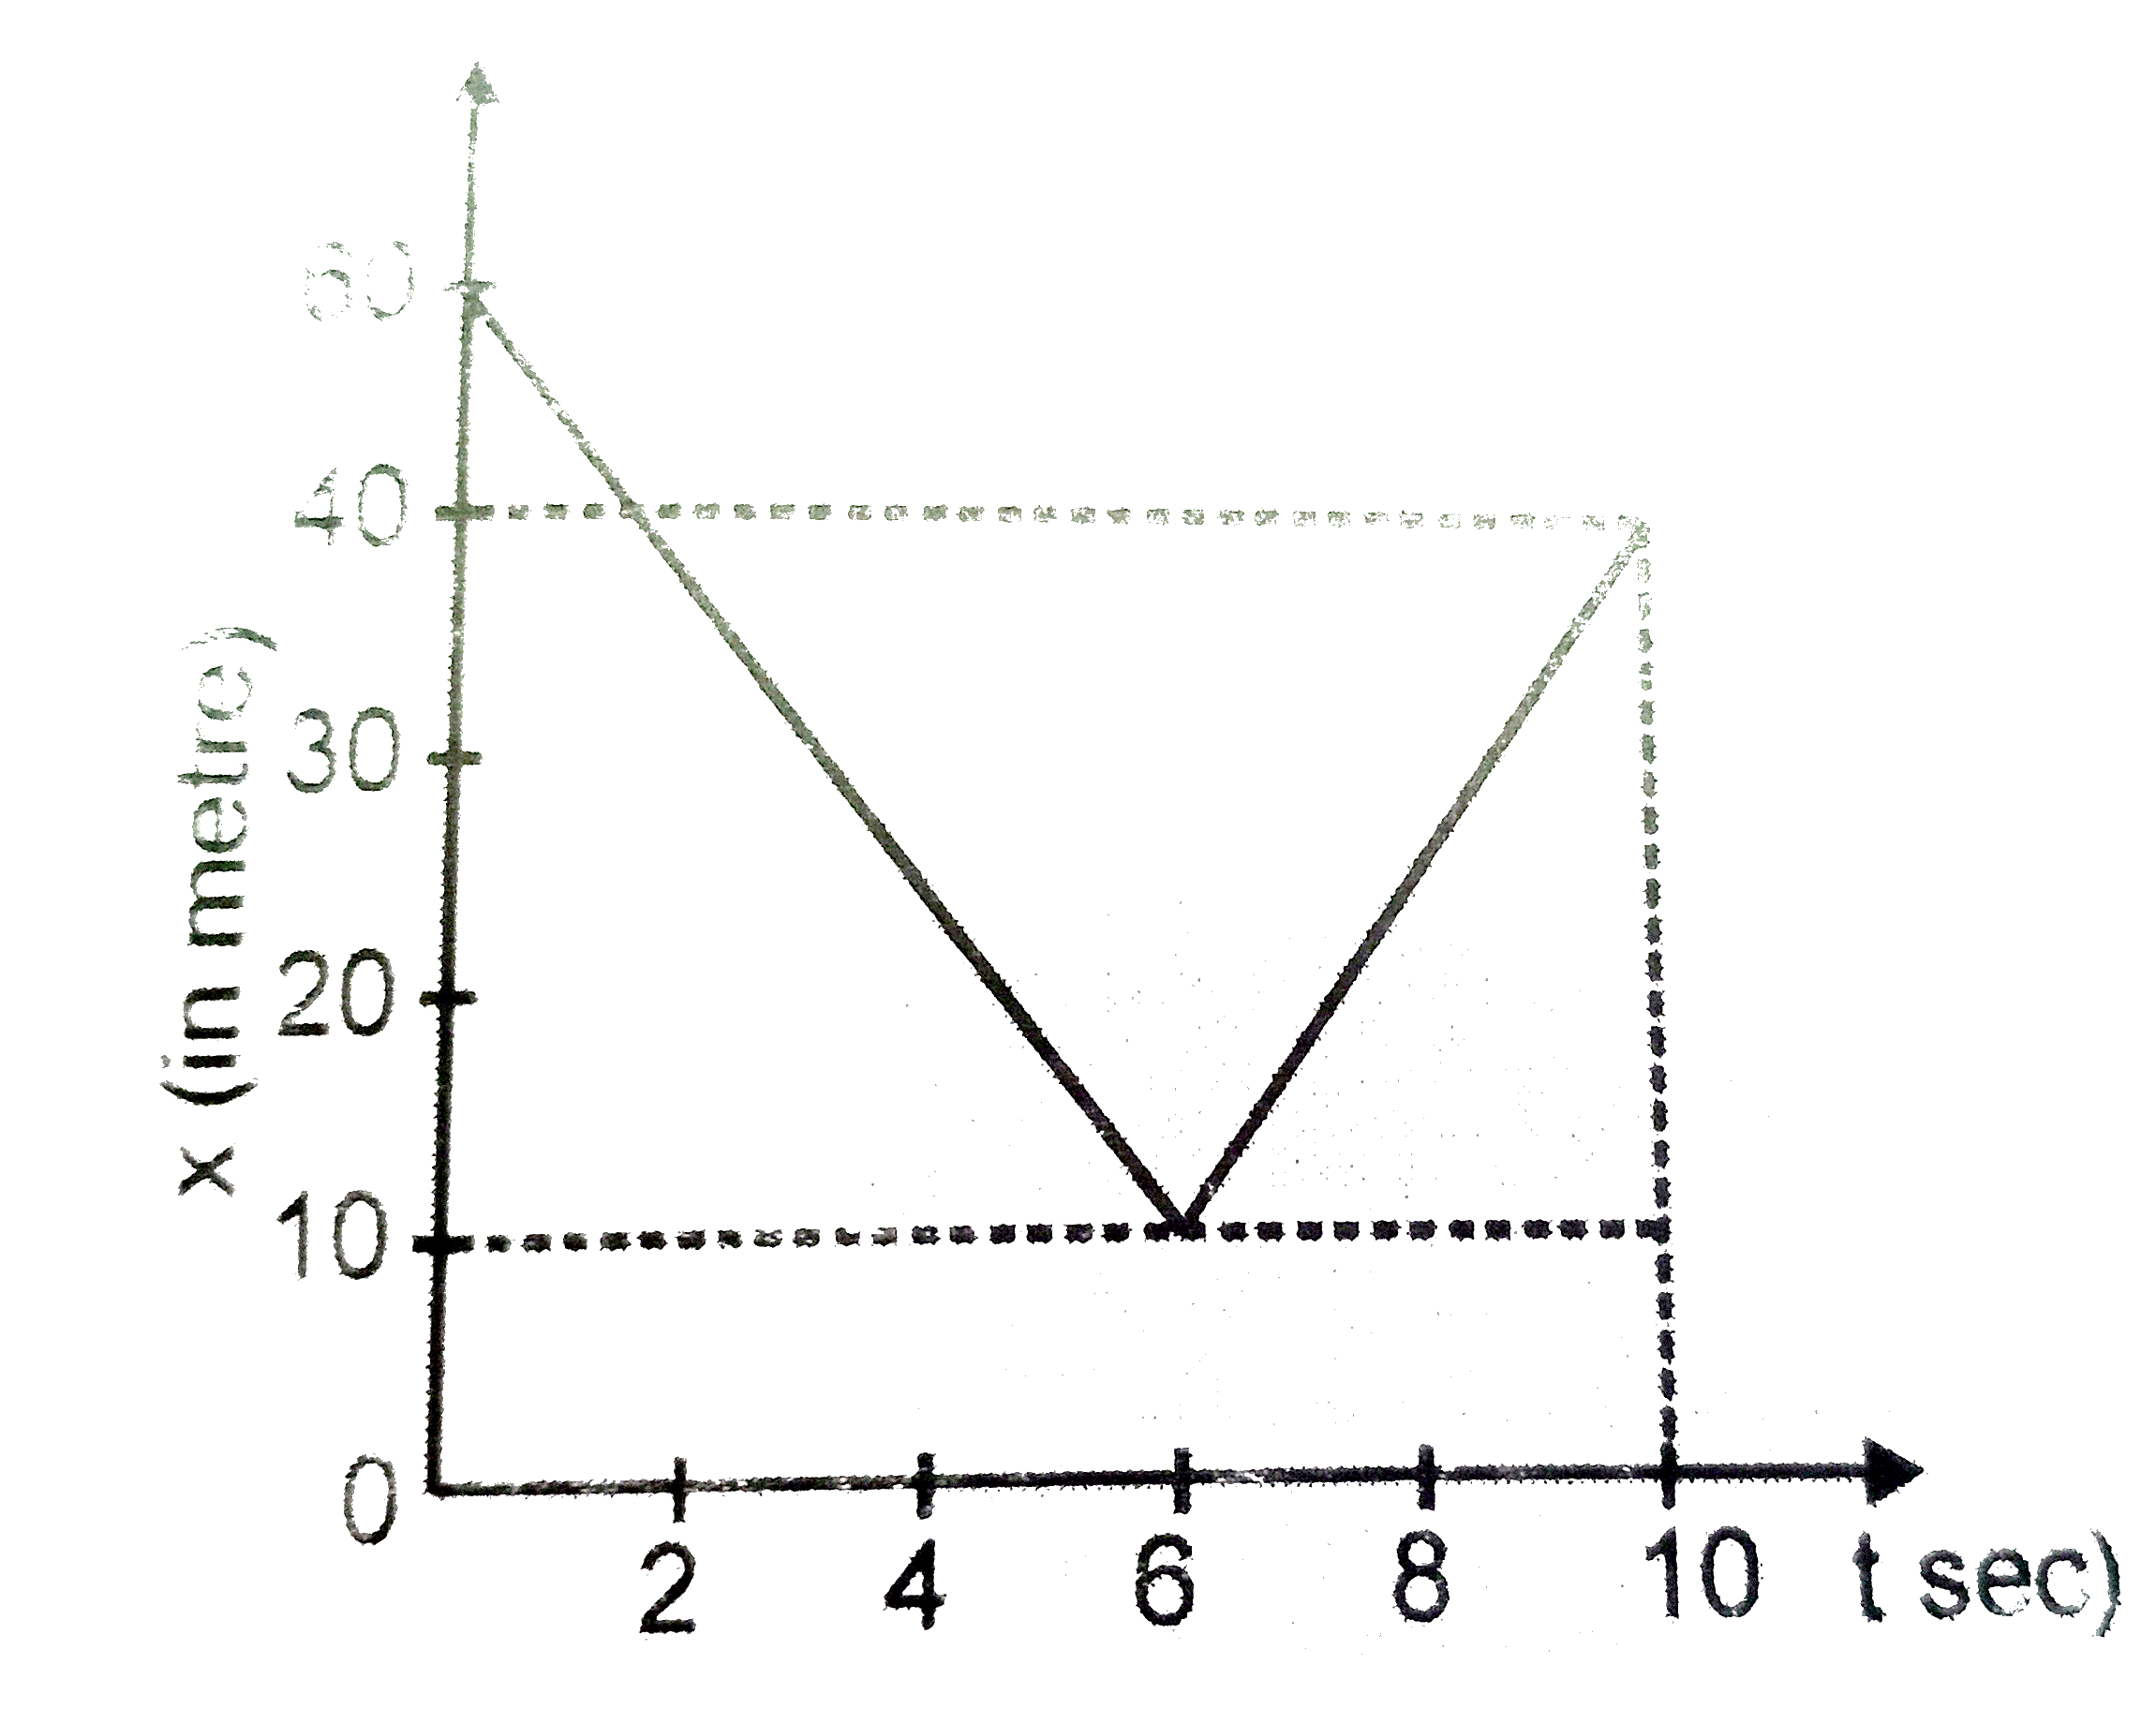 The fig. shows the displacement time graph of a particle moving on a straight line path. What is the magnitude of average velocity of the particle over 10 seconds?